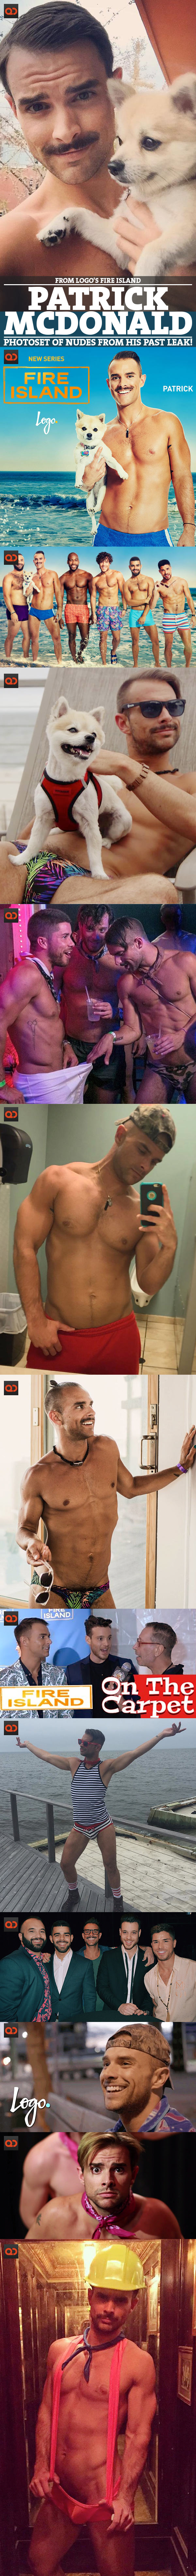 Patrick McDonald, From Logo's Fire Island, PhotoSet Of Nudes From His Past Leak!